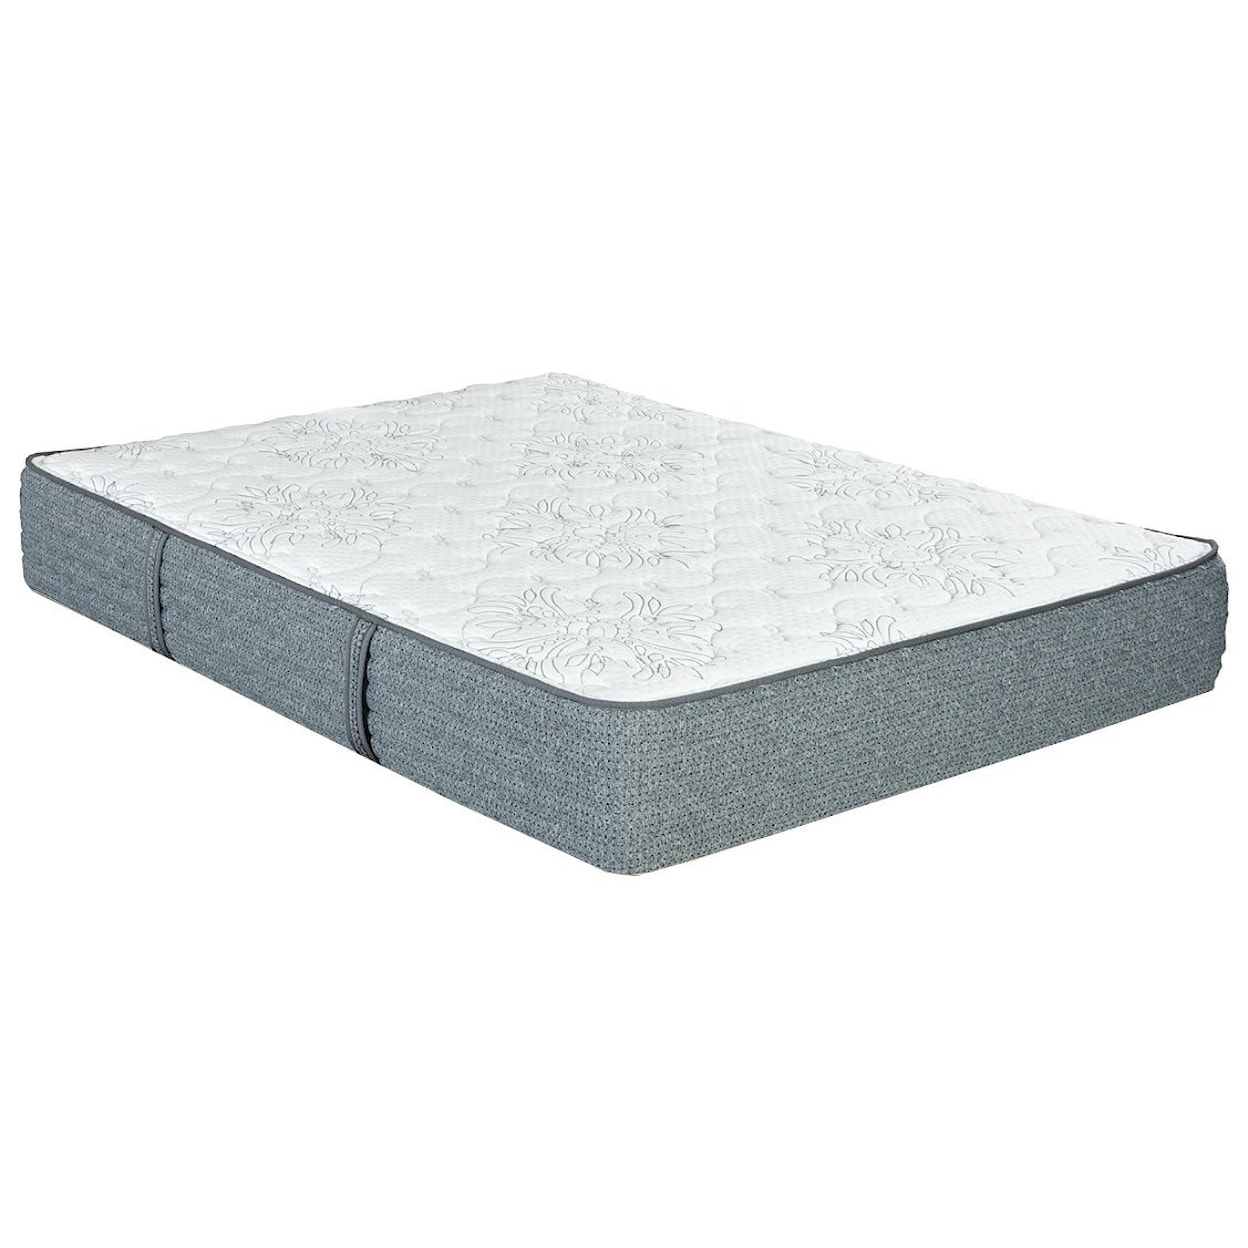 King Koil Laura Ashley Elise X Firm King 11" Extra Firm Mattress